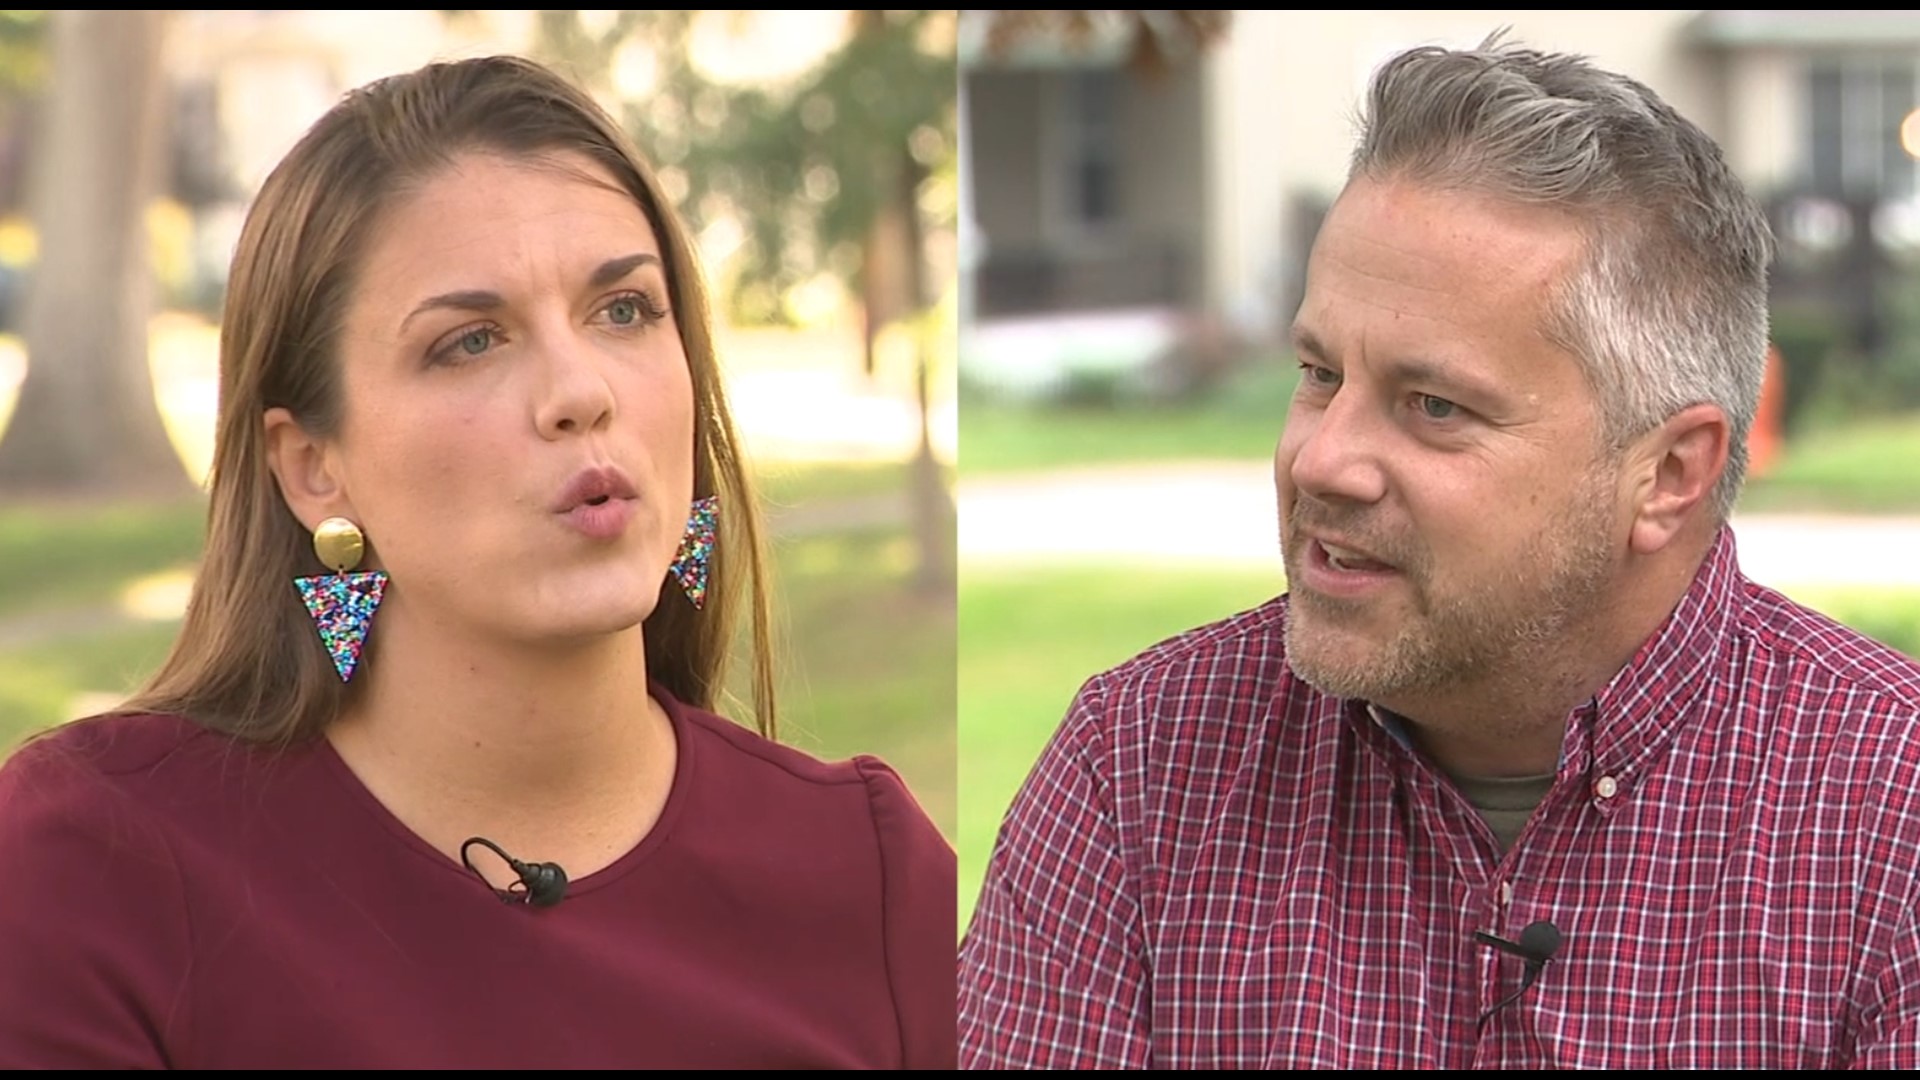 News 8 sat down with Esther Joy King (R) and Eric Sorensen (D) to hear each 17th district candidate's policies and points of view ahead of the midterm elections.